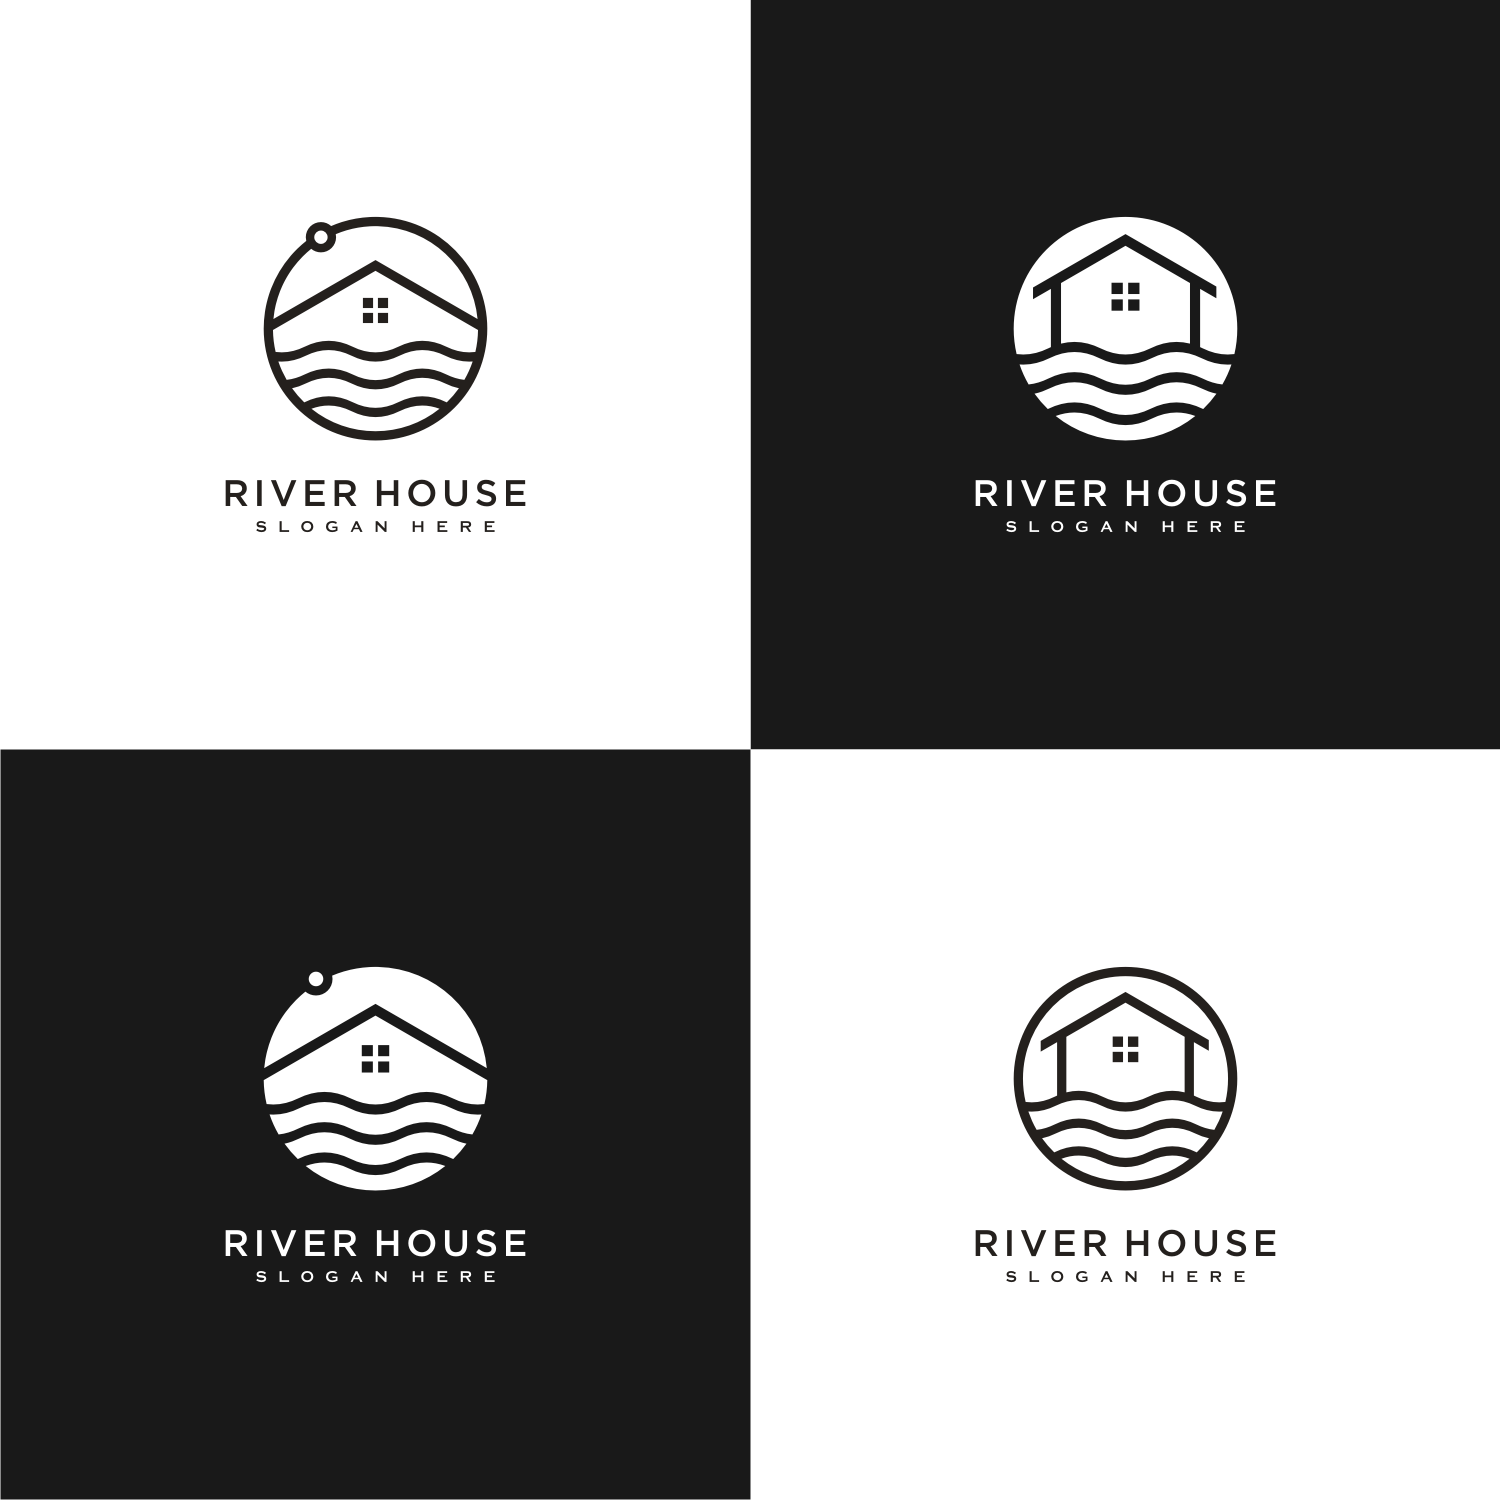 Set Of Minimalist Line Abstract House With River Logo Design Cover Image.